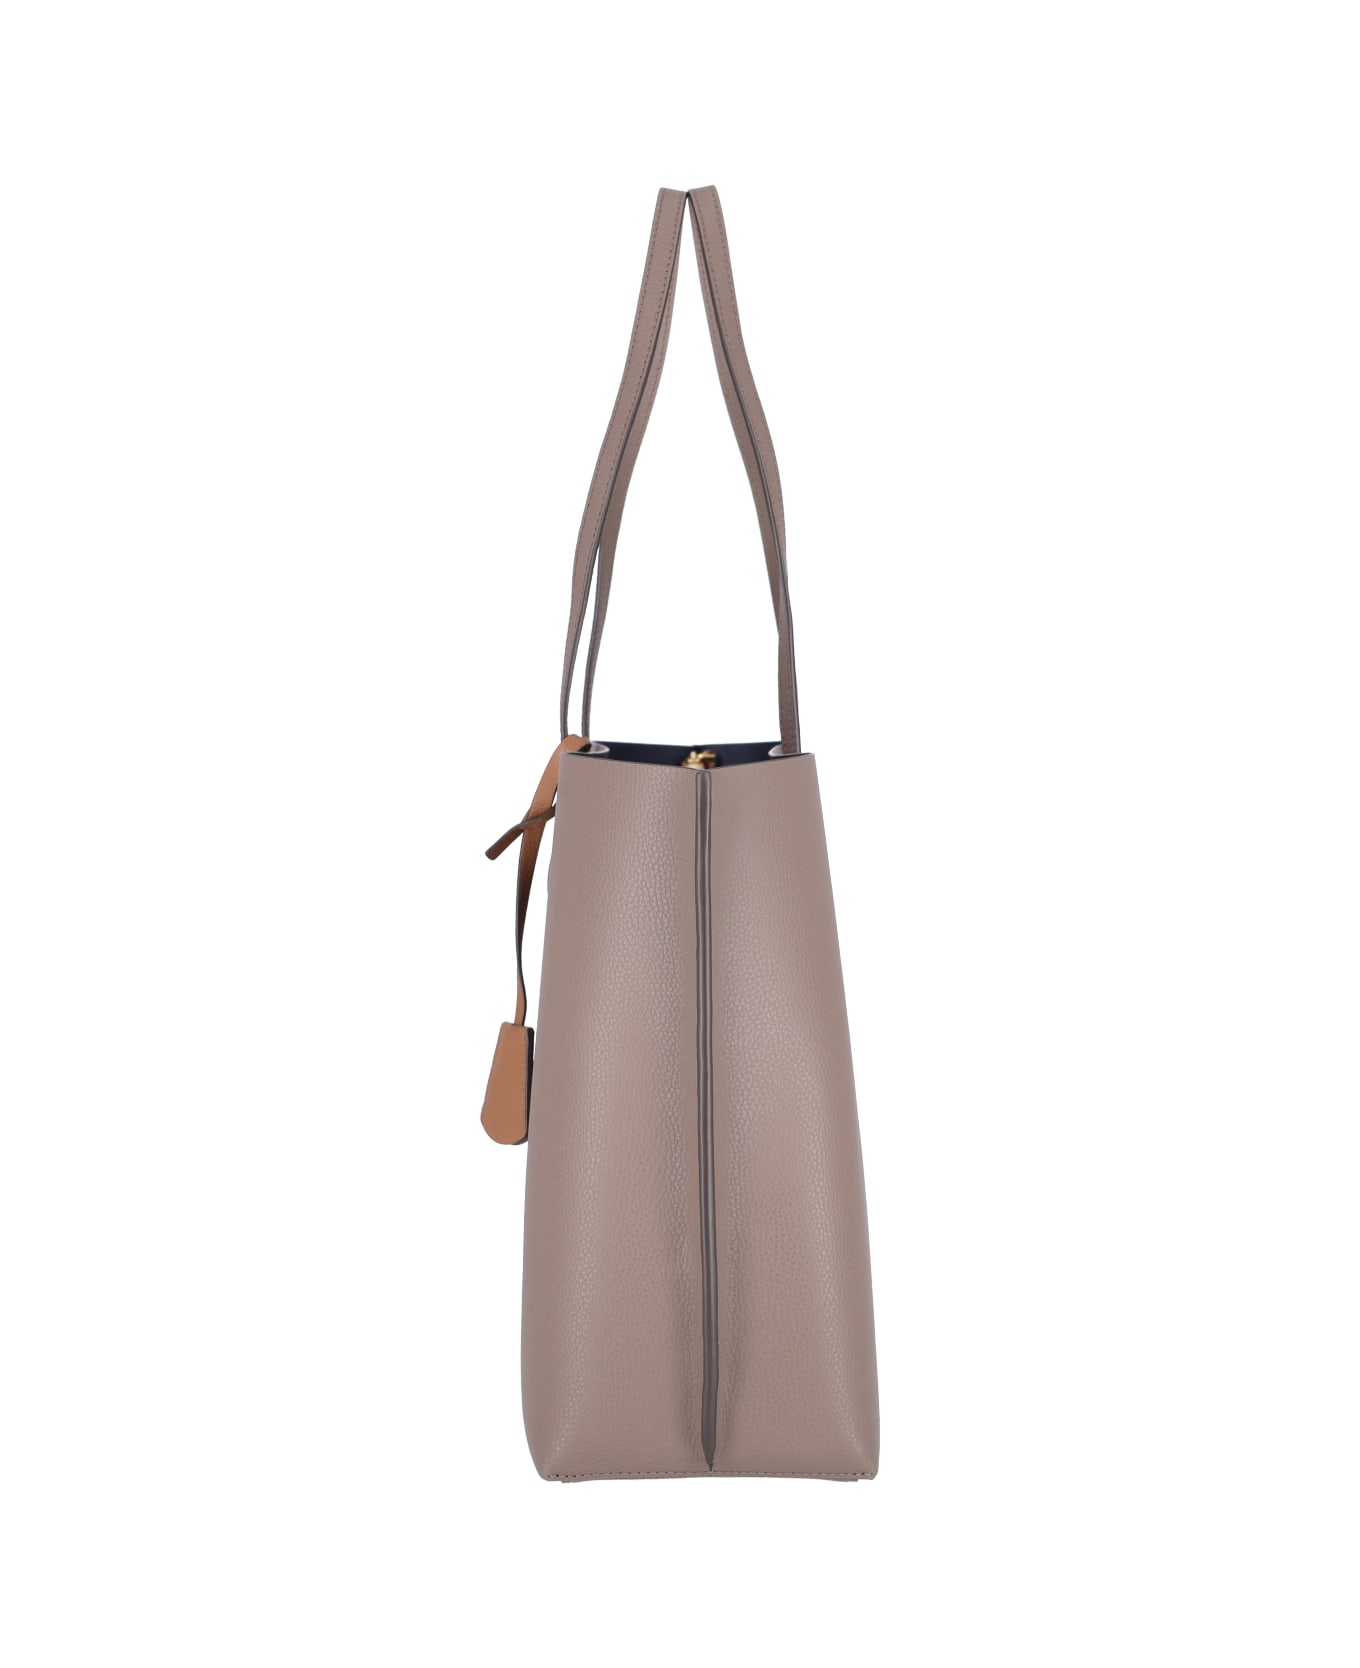 Tory Burch "perry" Tote Bag - Taupe